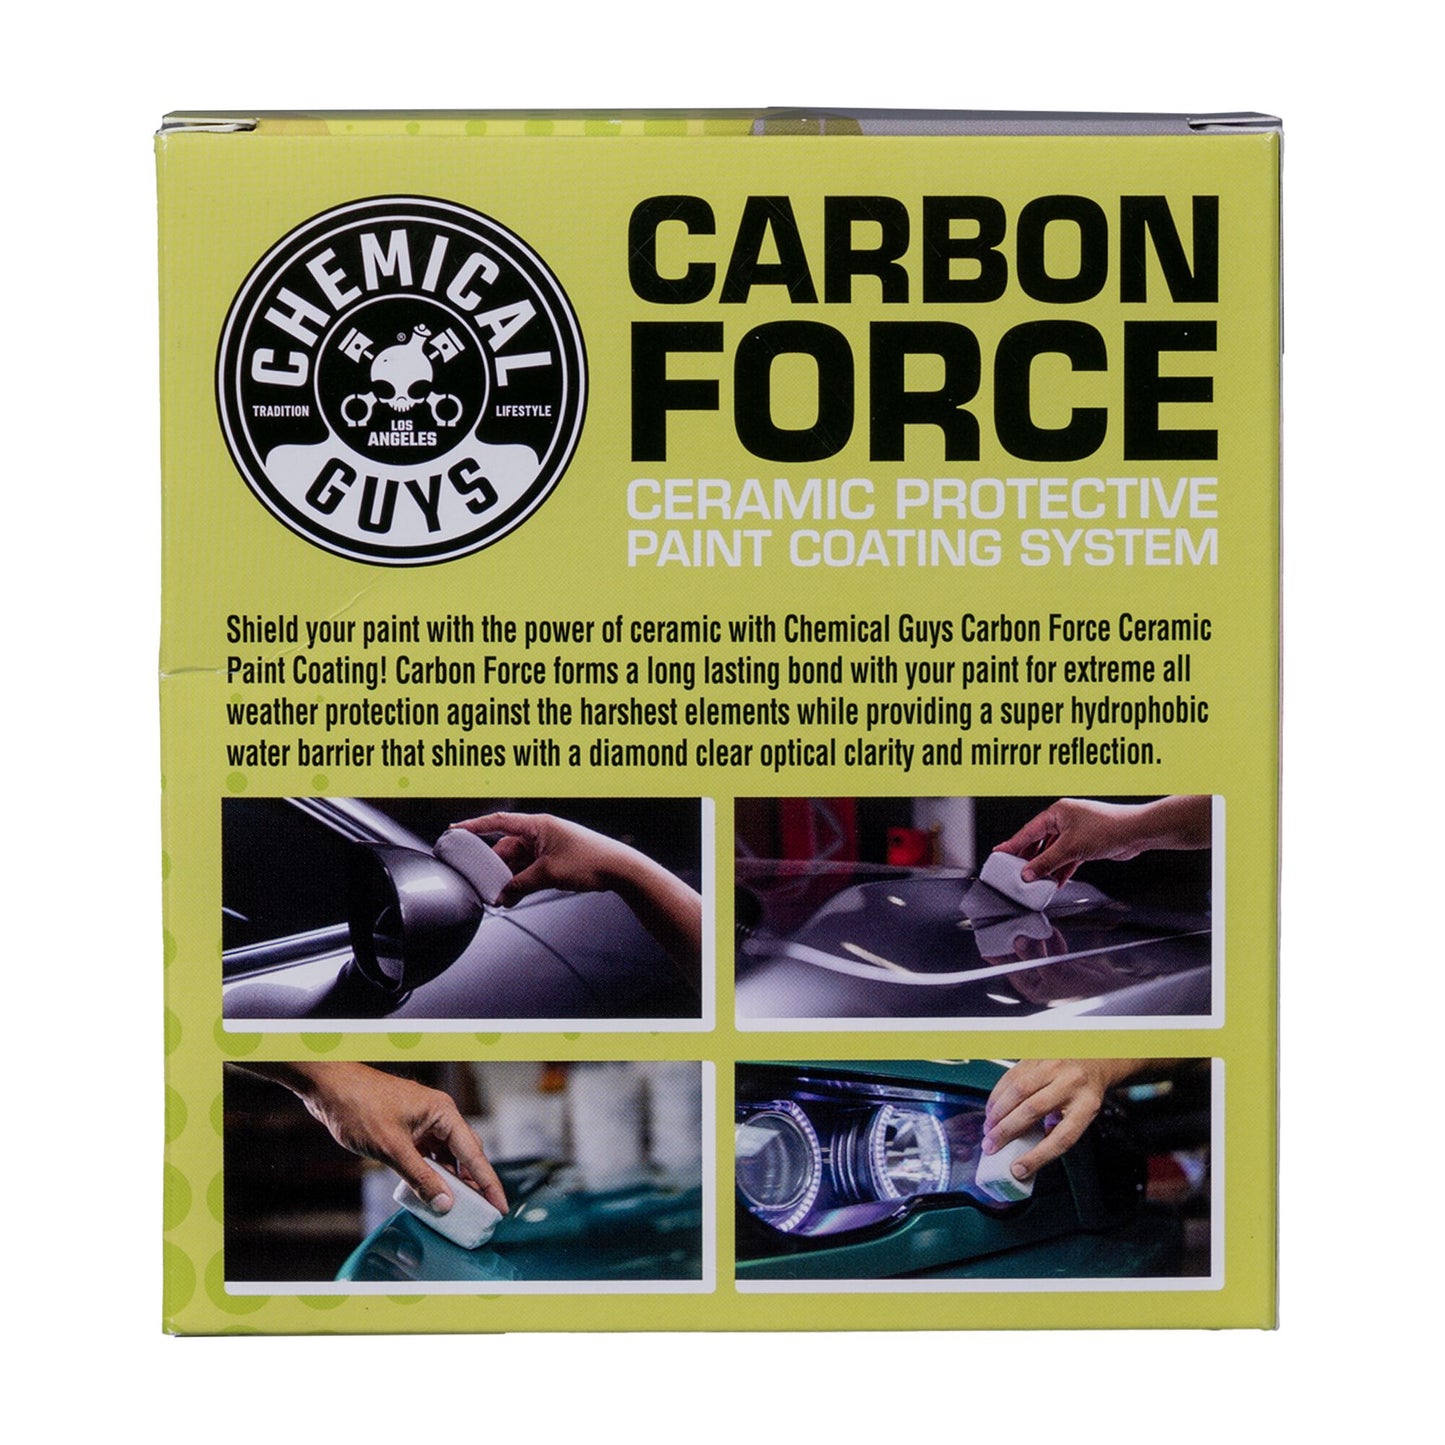 Carbon Force Ceramic Protective Paint Coating System